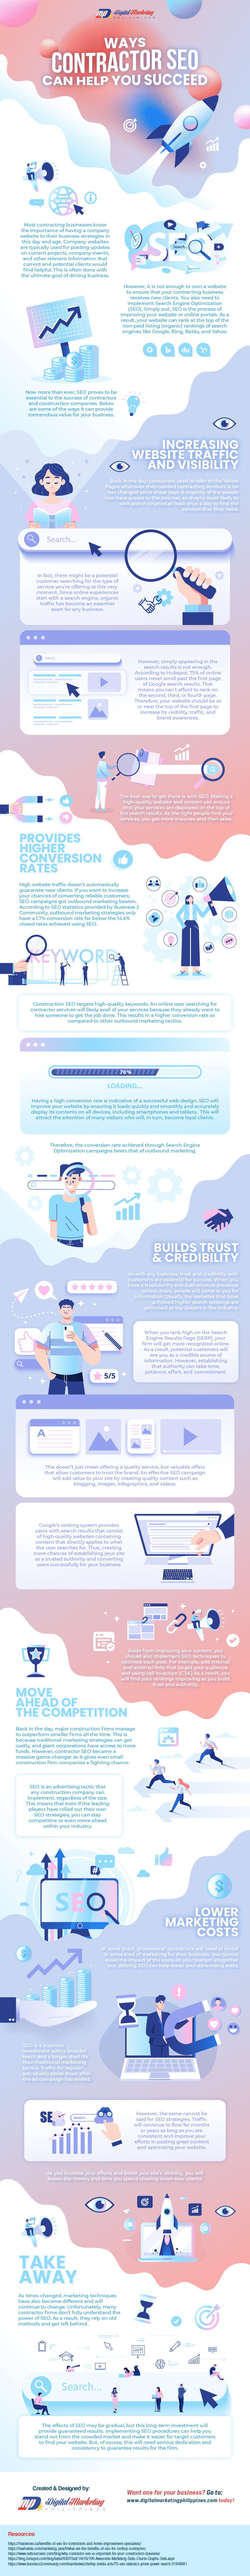 Ways Contractor SEO can Help You Succeed (Infographic) - An Infographic from Digital Marketing Philippines